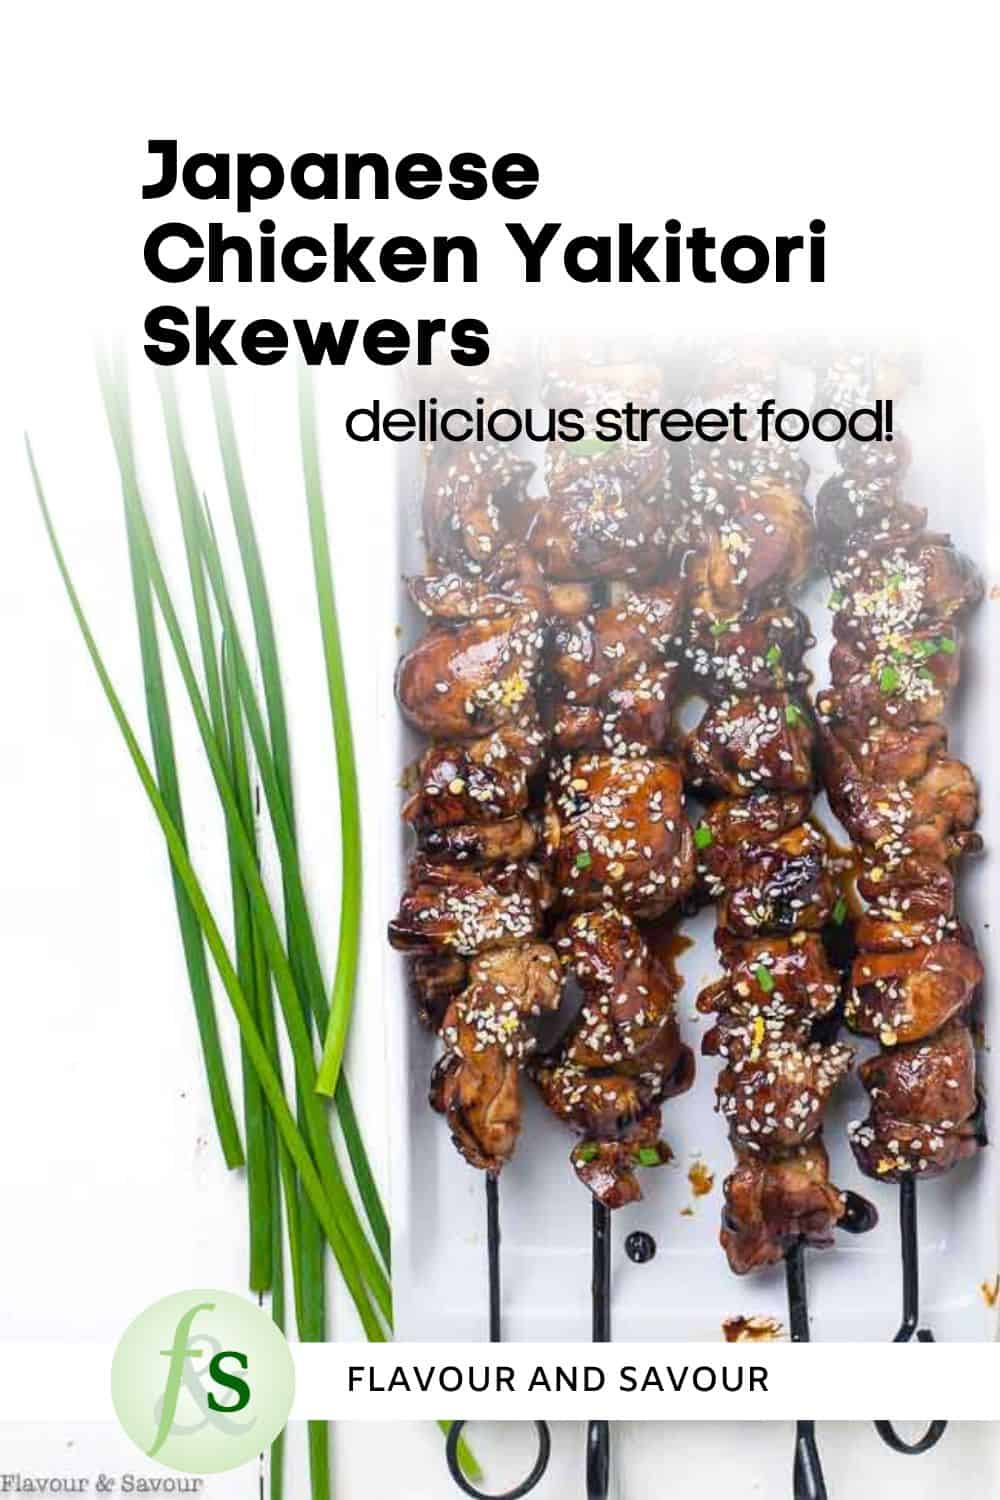 Image with text for Japanese yakitori skewers.